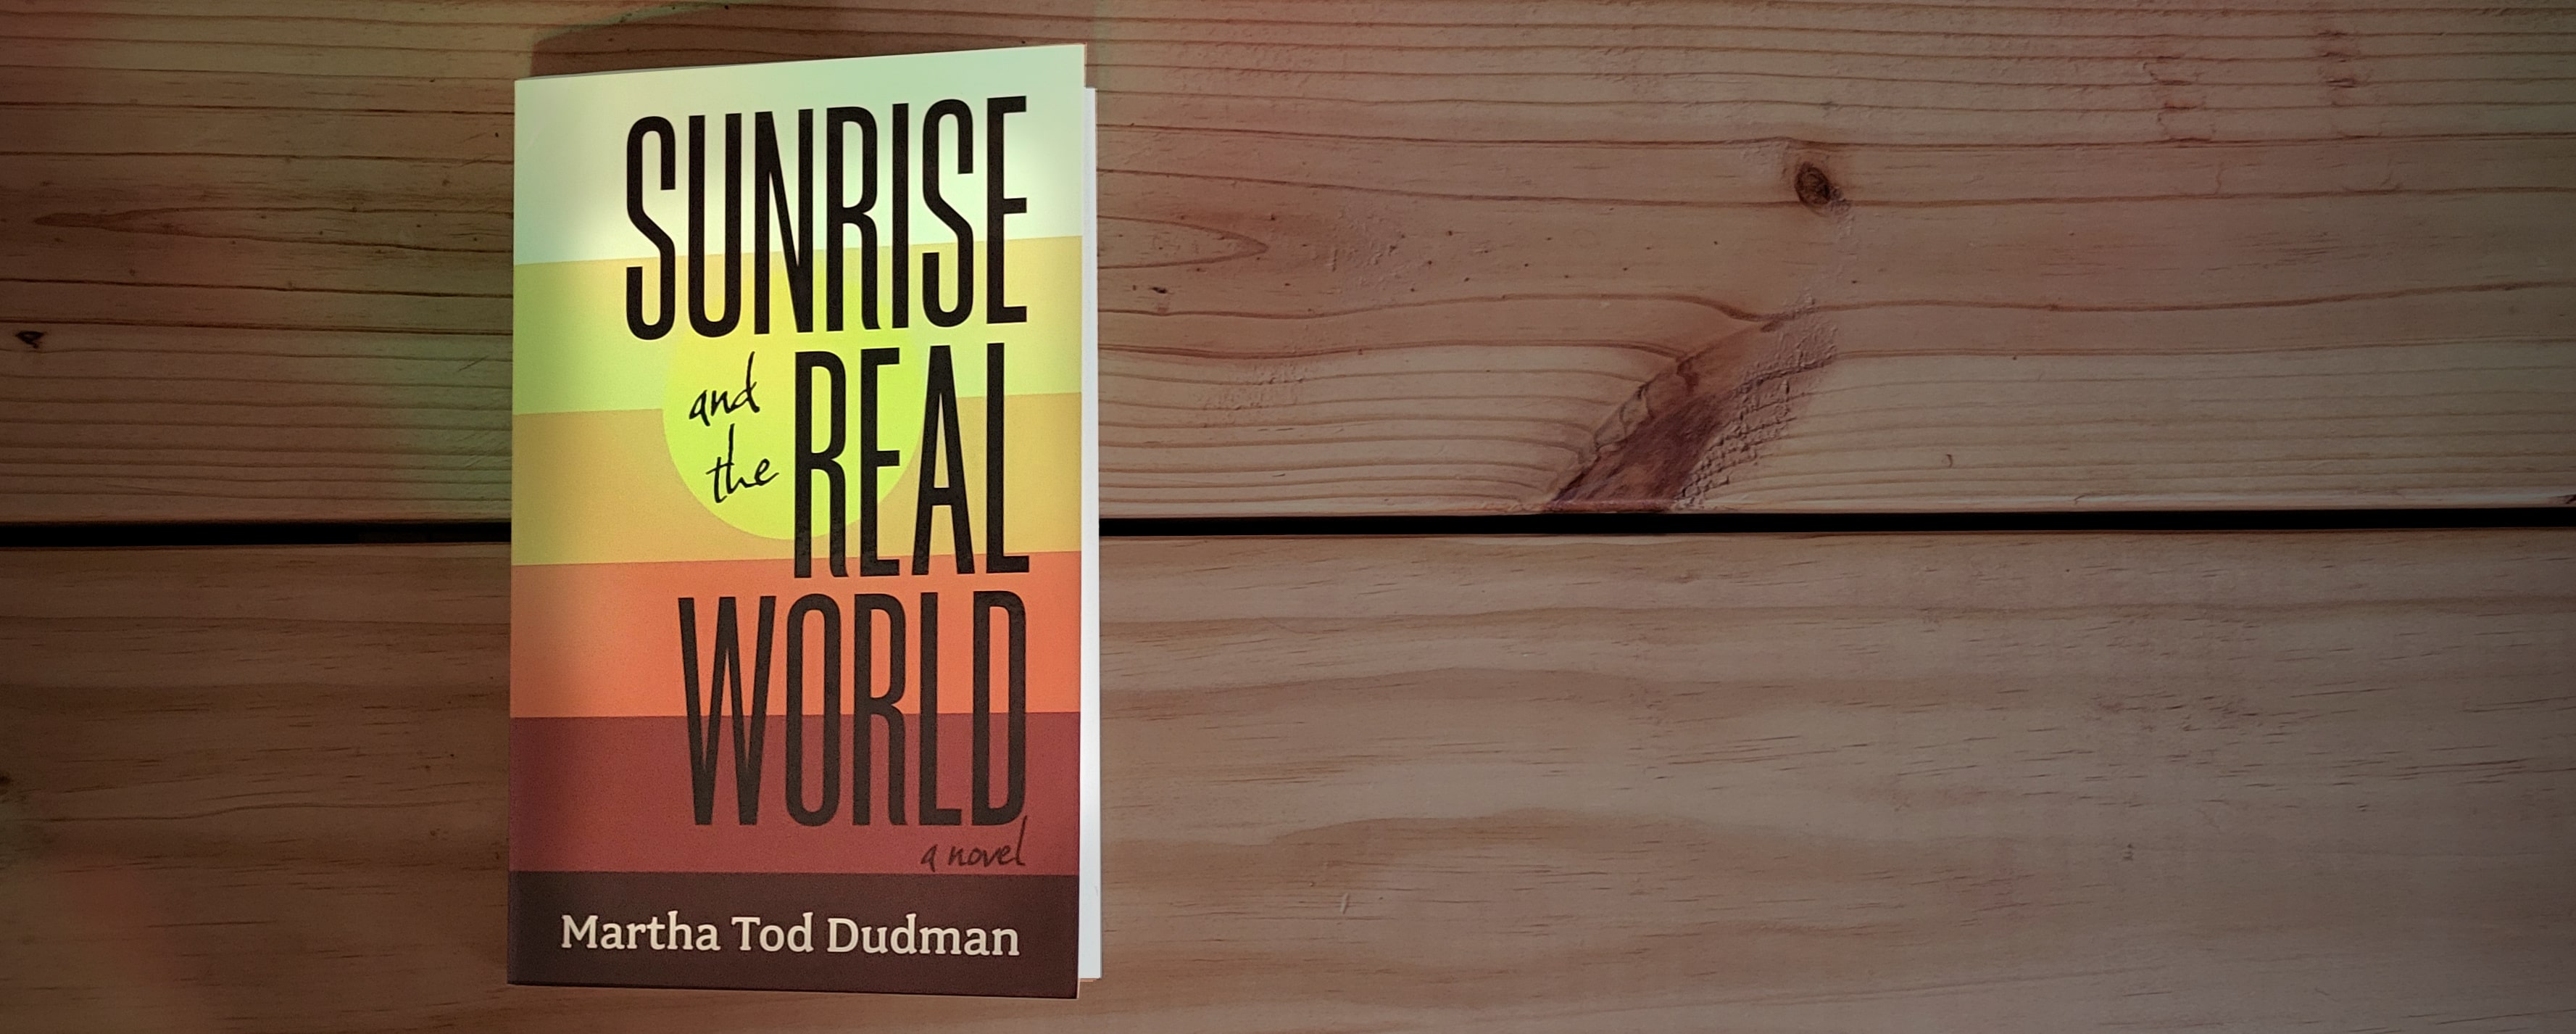 Book Cover of Sunrise and the Real World by Martha Tod Dudman